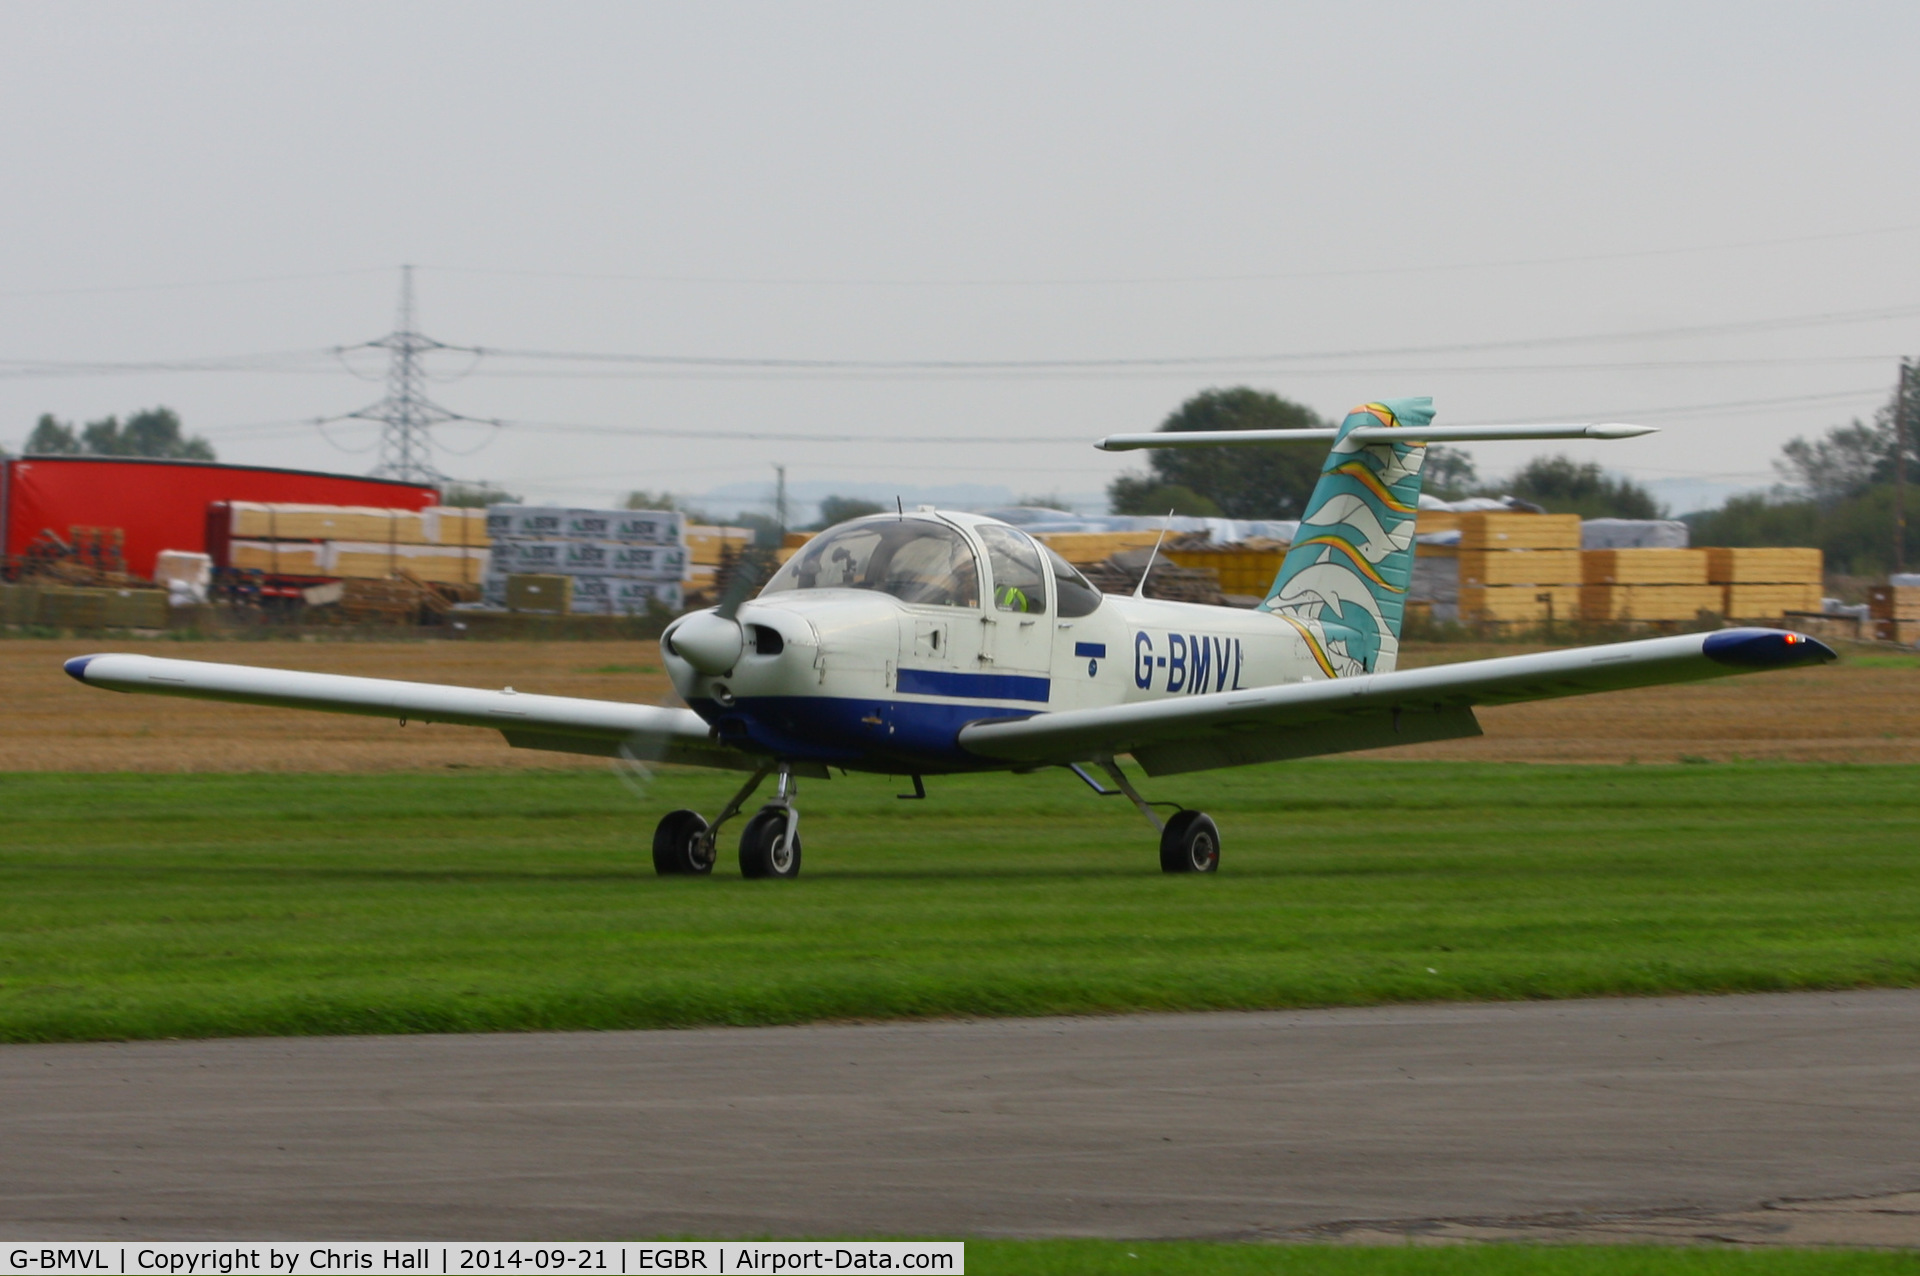 G-BMVL, 1979 Piper PA-38-112 Tomahawk Tomahawk C/N 38-79A0033, at Breighton's Heli Fly-in, 2014